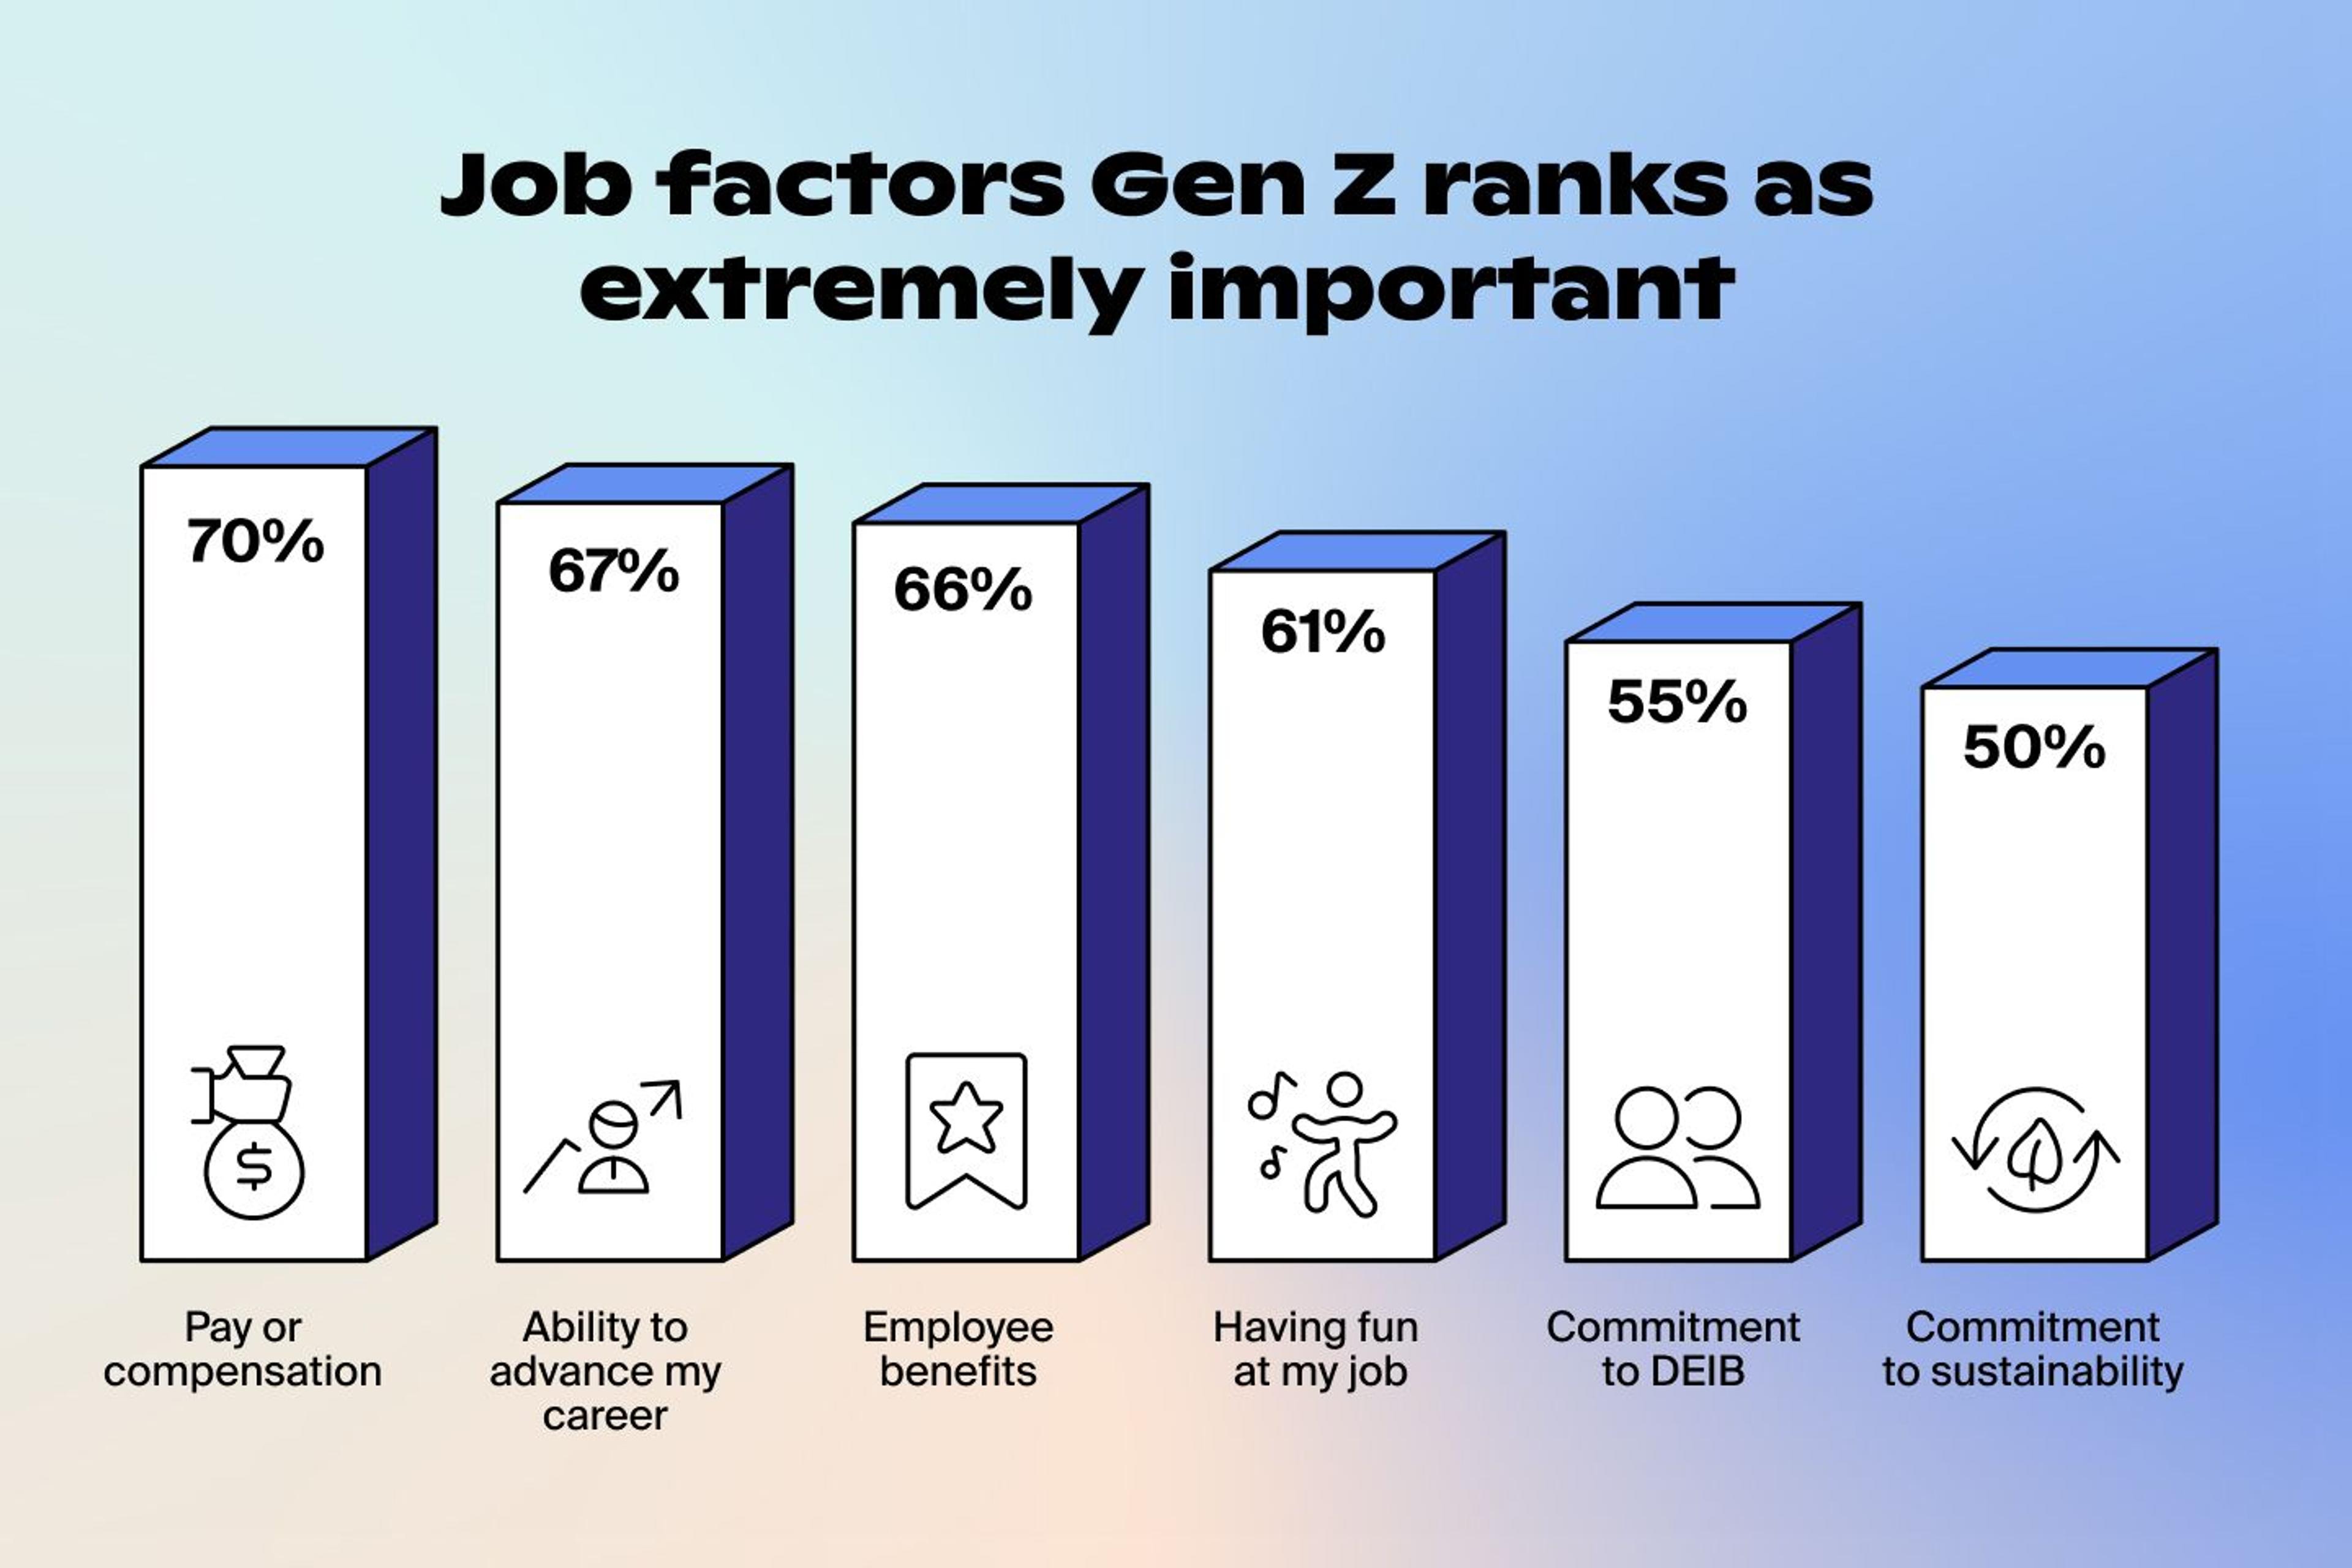 Chart showing 6 things Gen Z wants from their next job in descending order